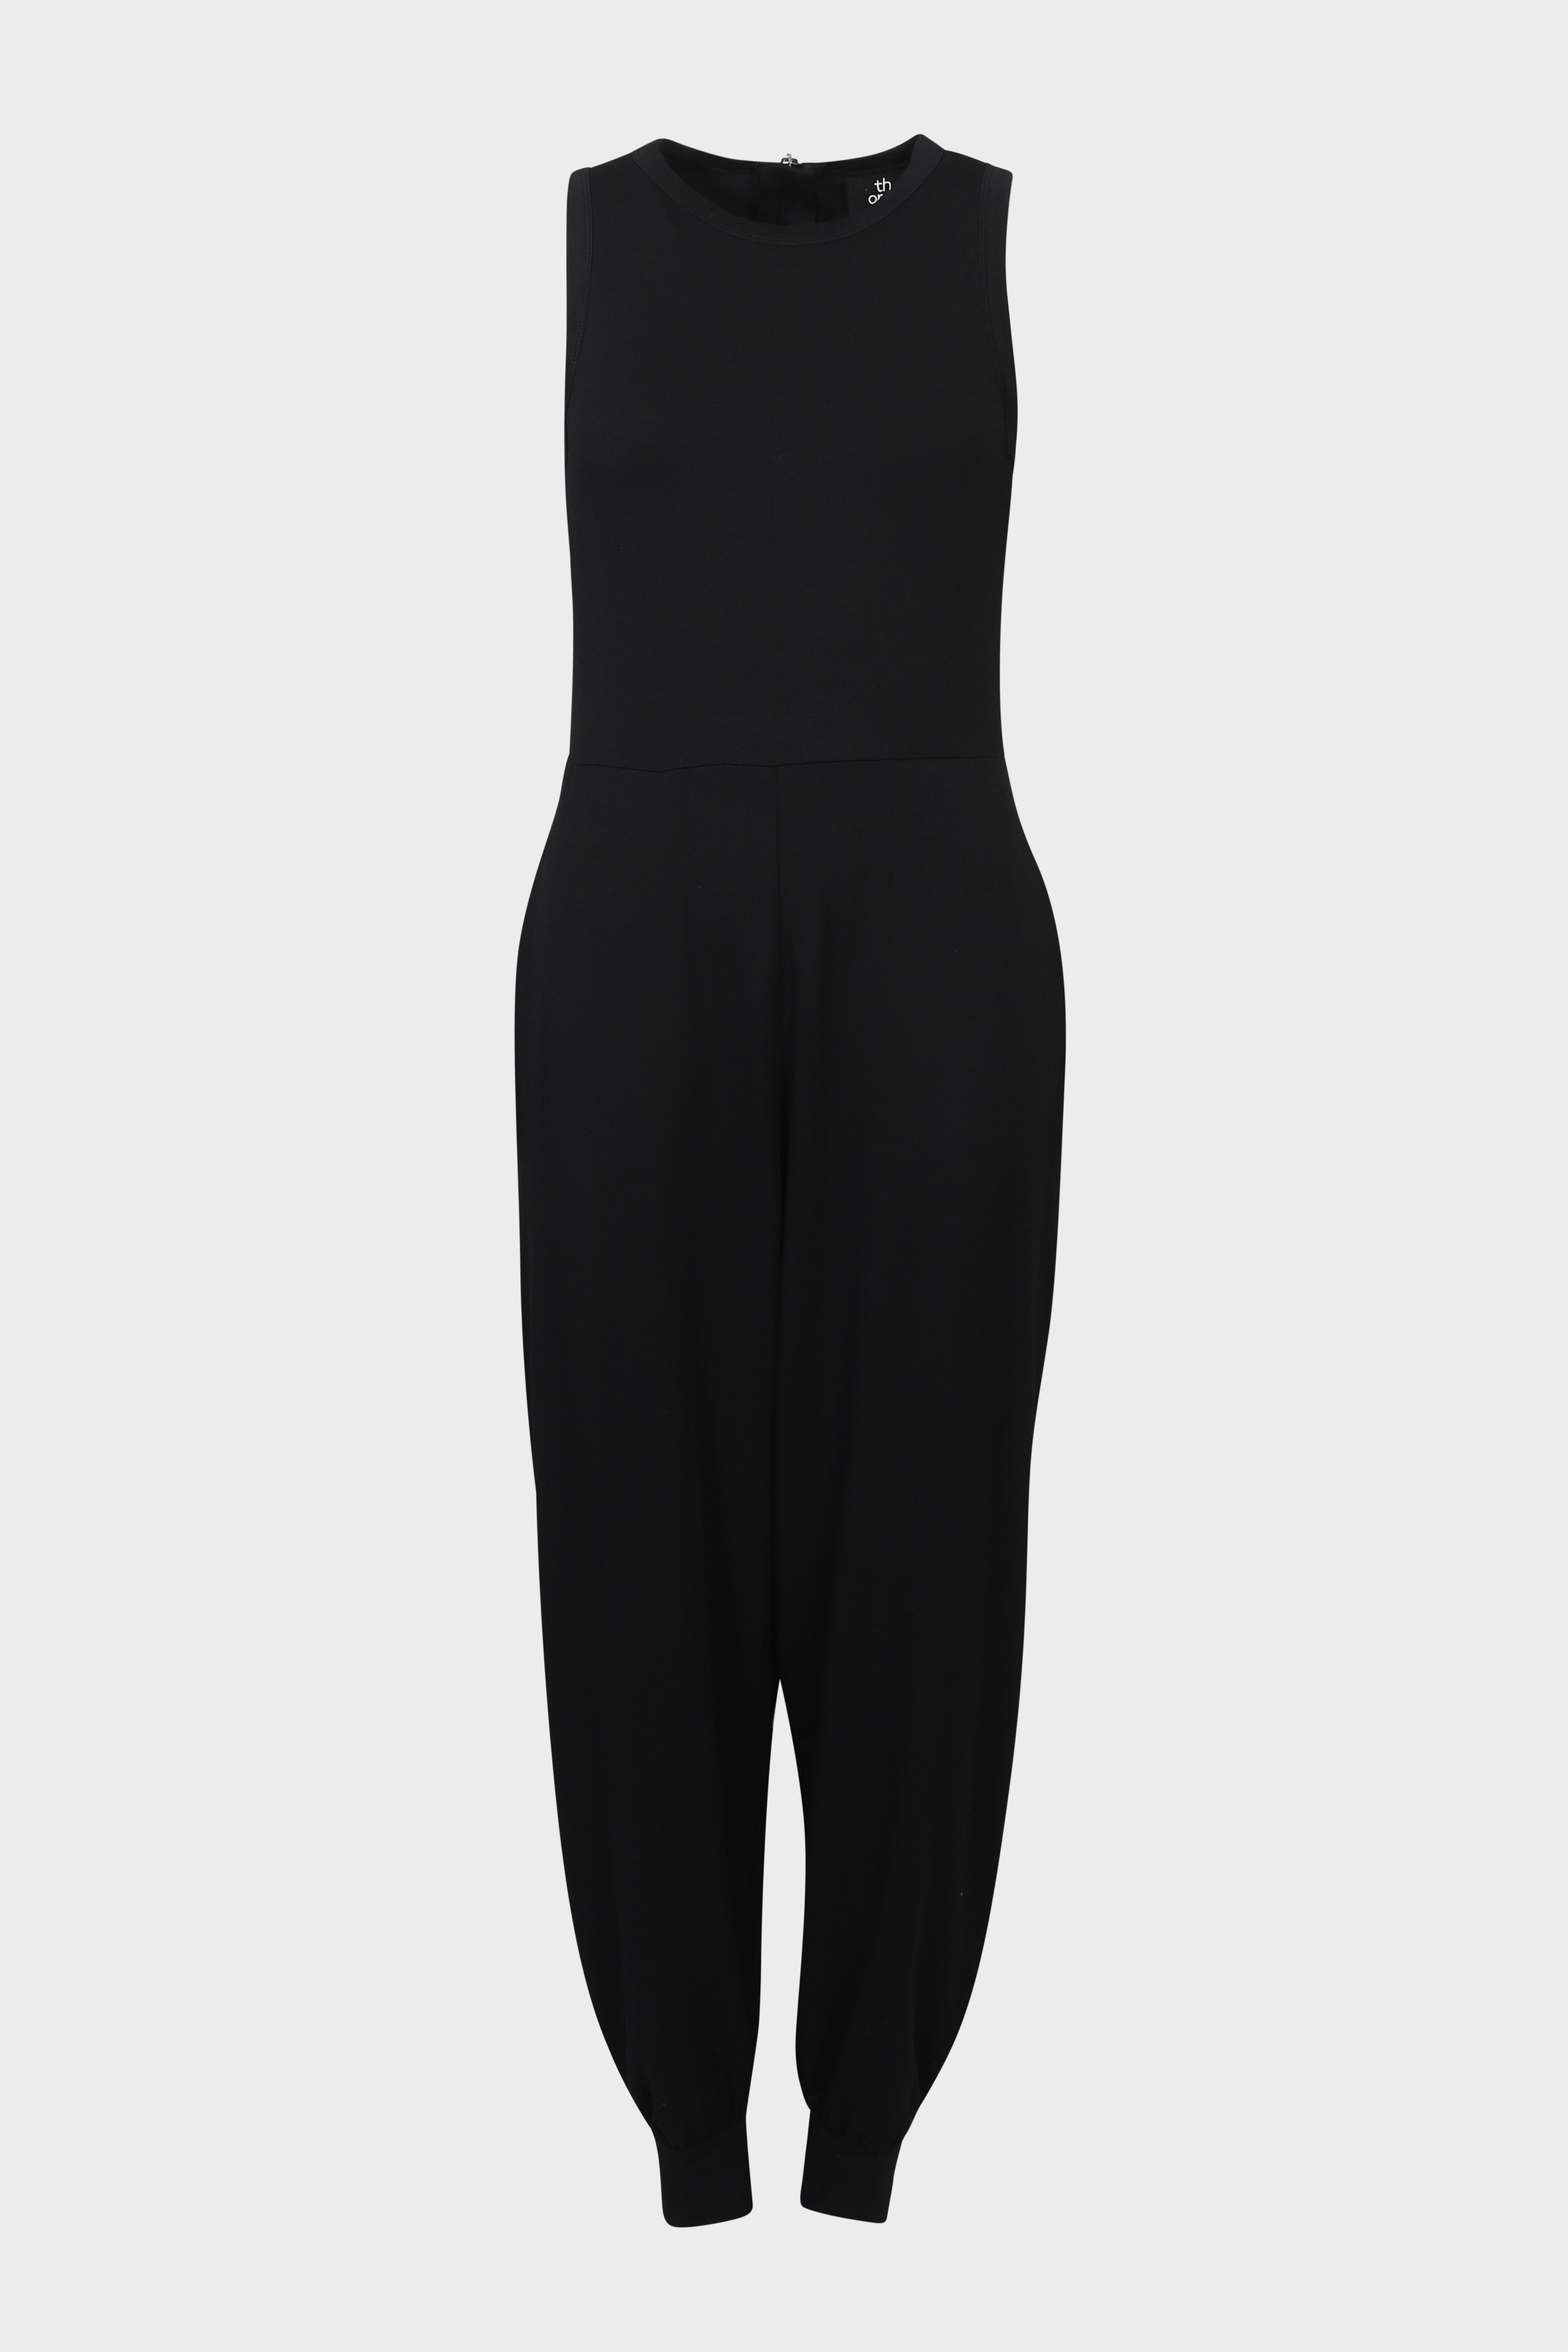 THOM KROM Overall in Black S